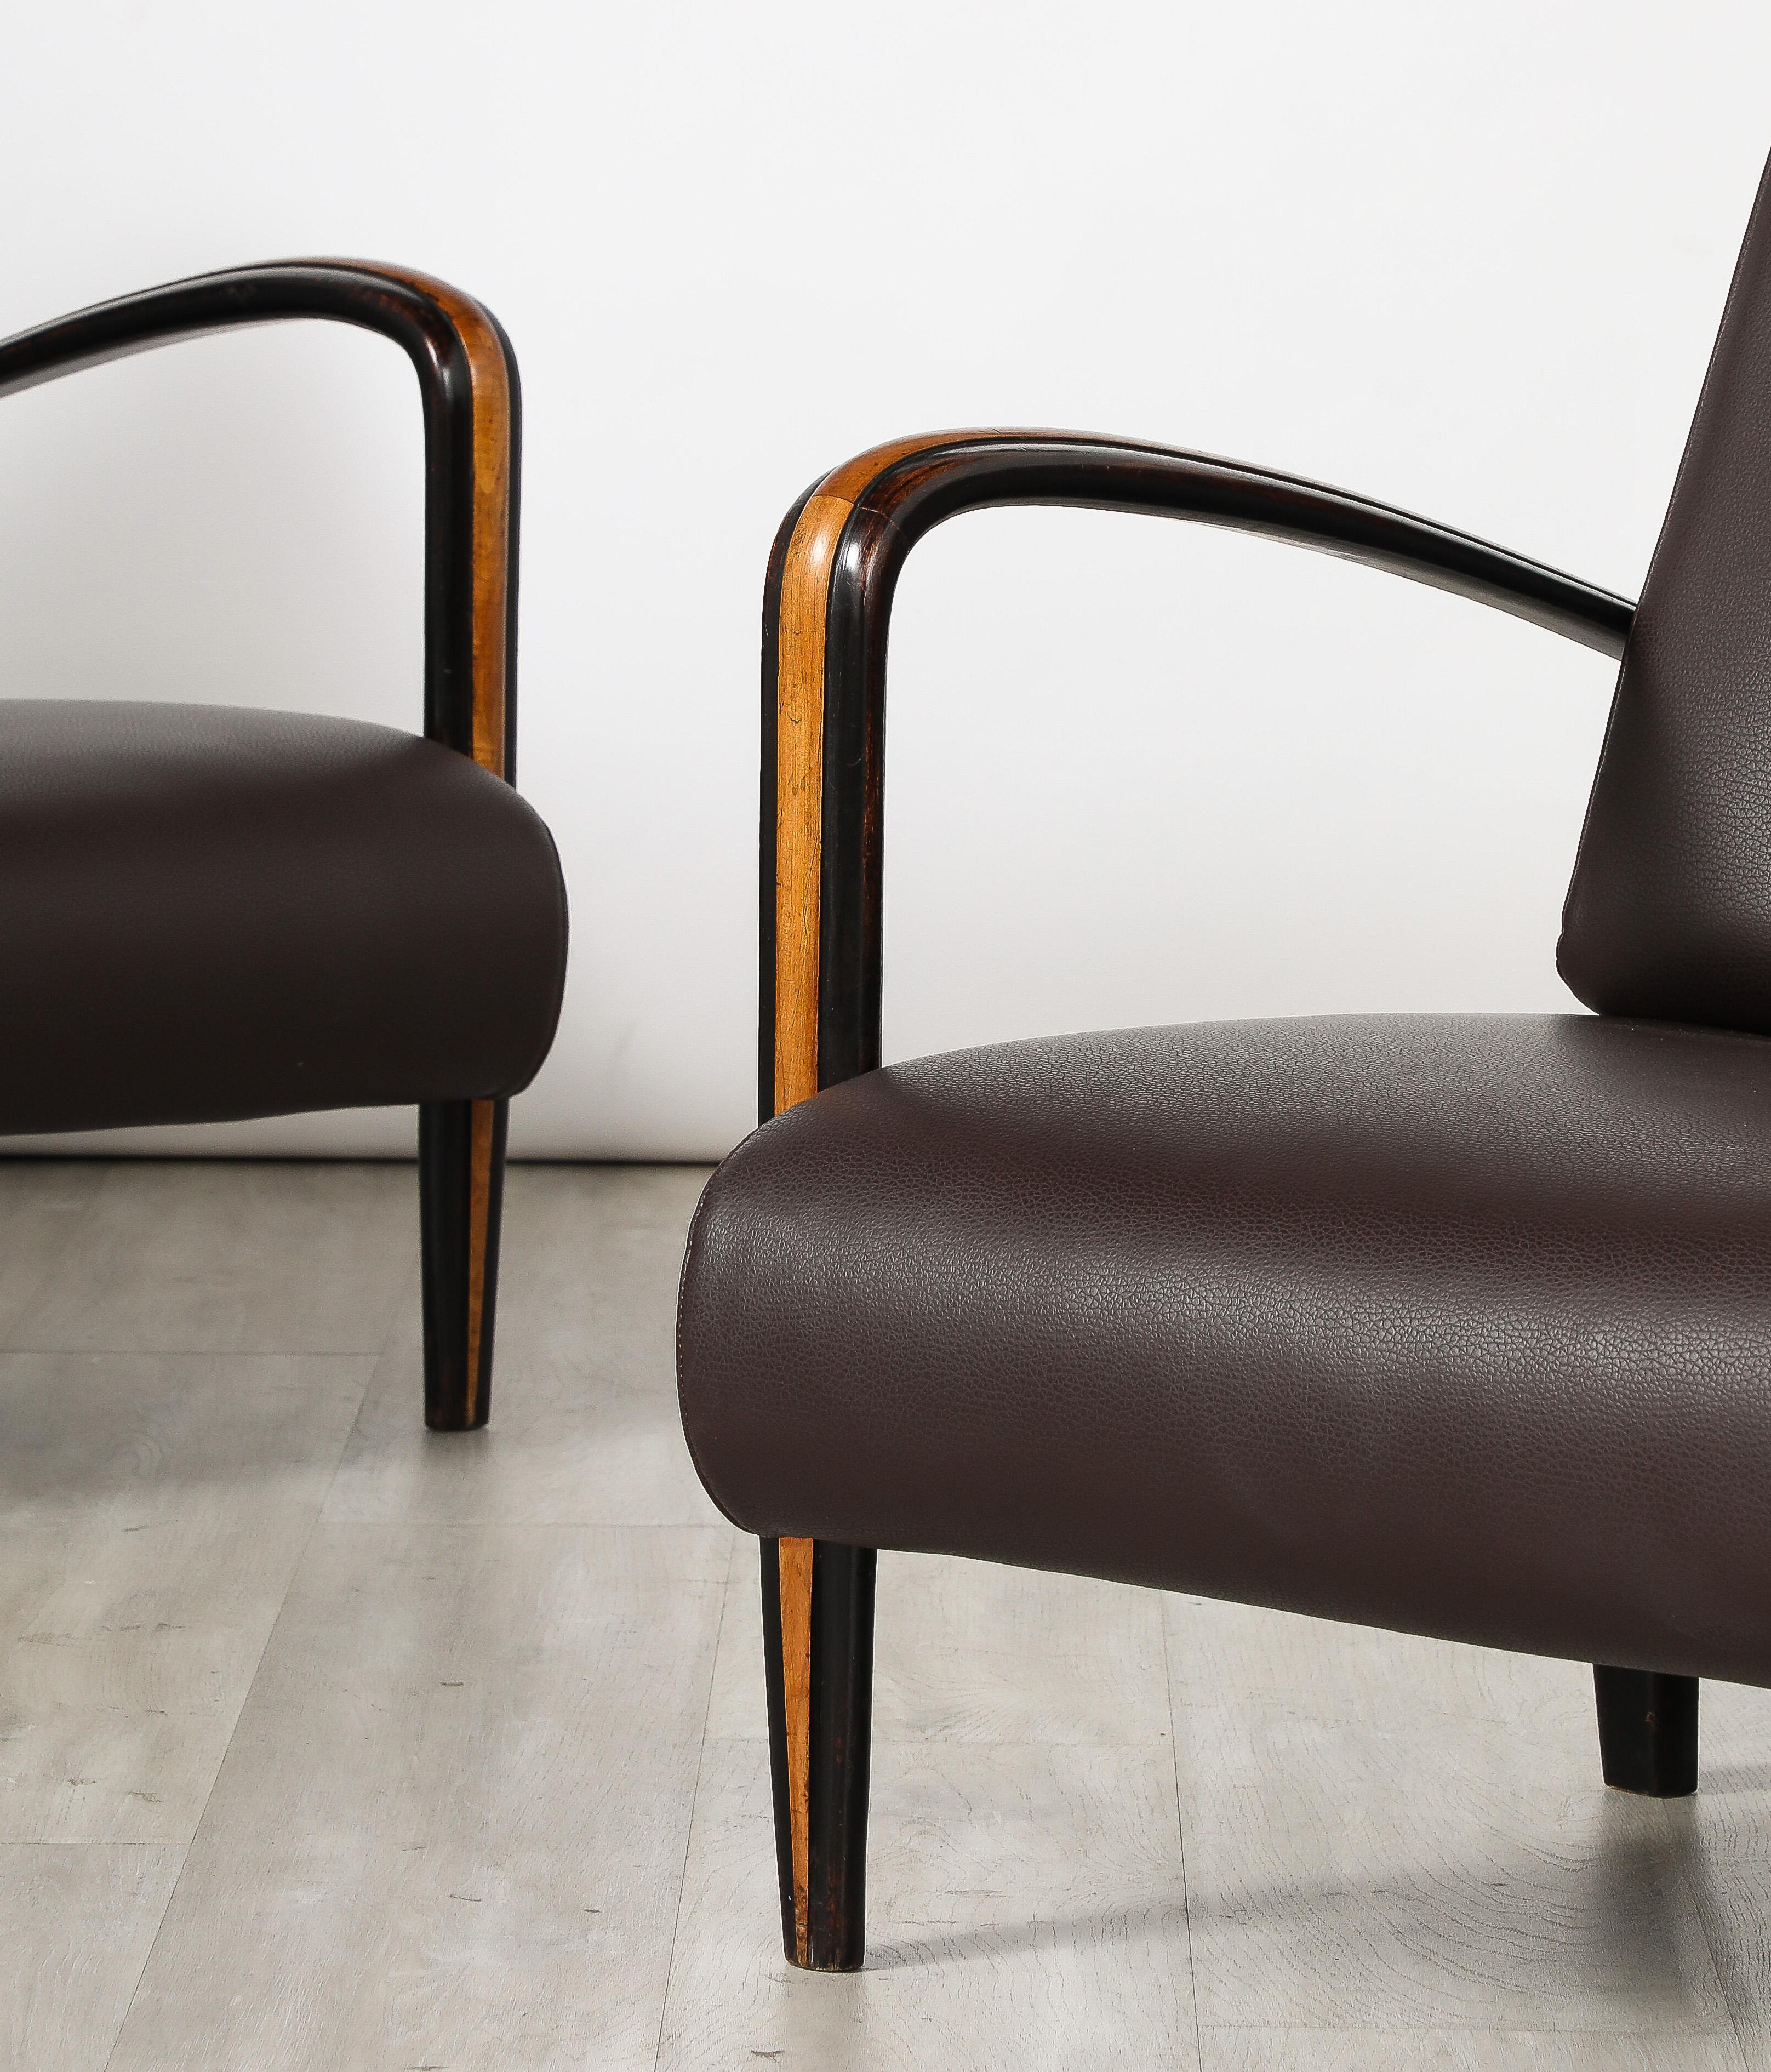 Pair of Italian Modernist Lounge Chairs, Italy, circa 1940 For Sale 6